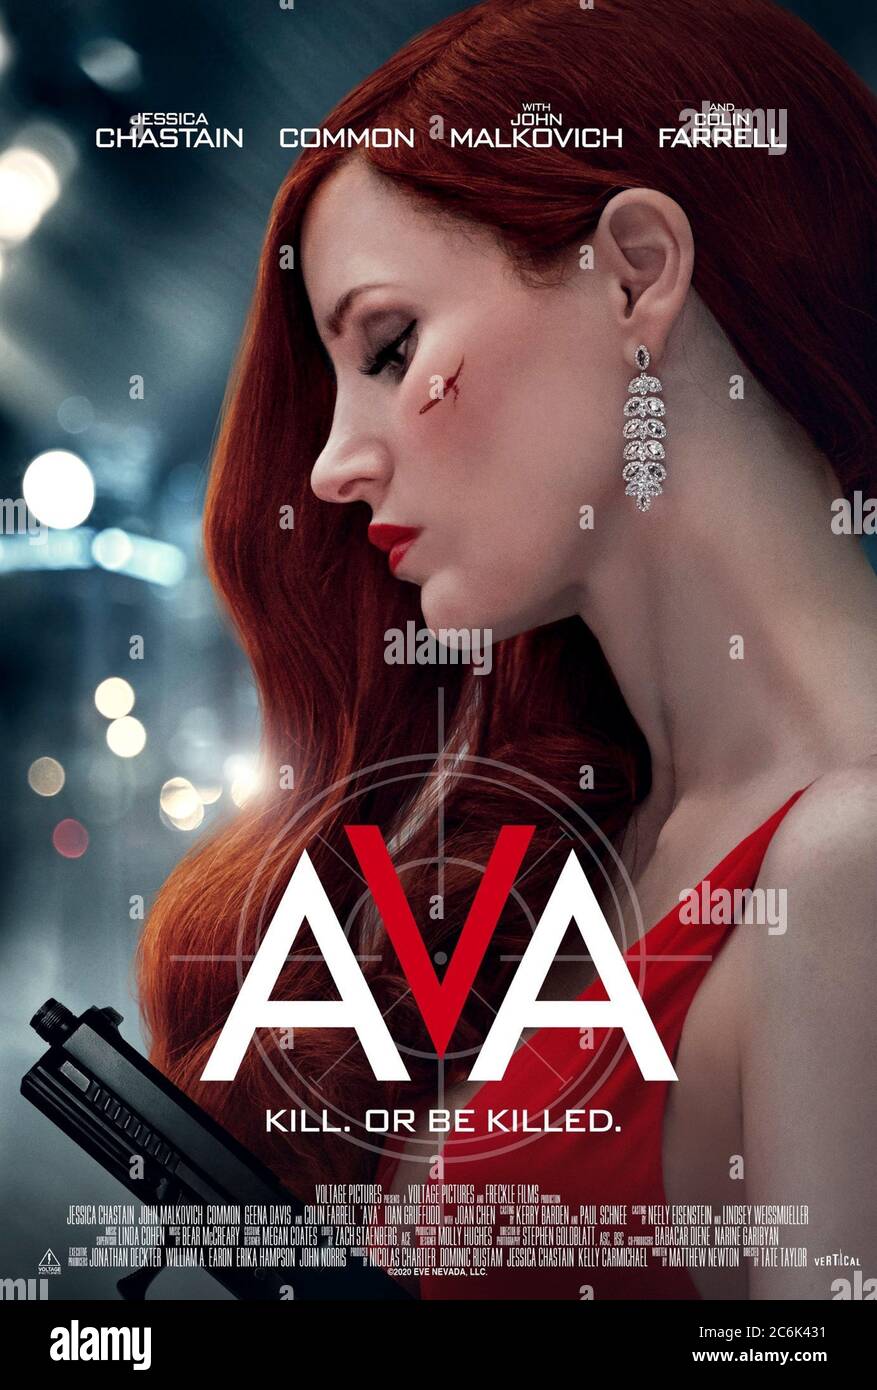 Ava (2020) directed by Tate Taylor and starring Jessica Chastain, Diana Silvers, Common, Colin Farrell and John Malkovich. A deadly female assassin fights for survival when a high profile hit goes wrong. Stock Photo